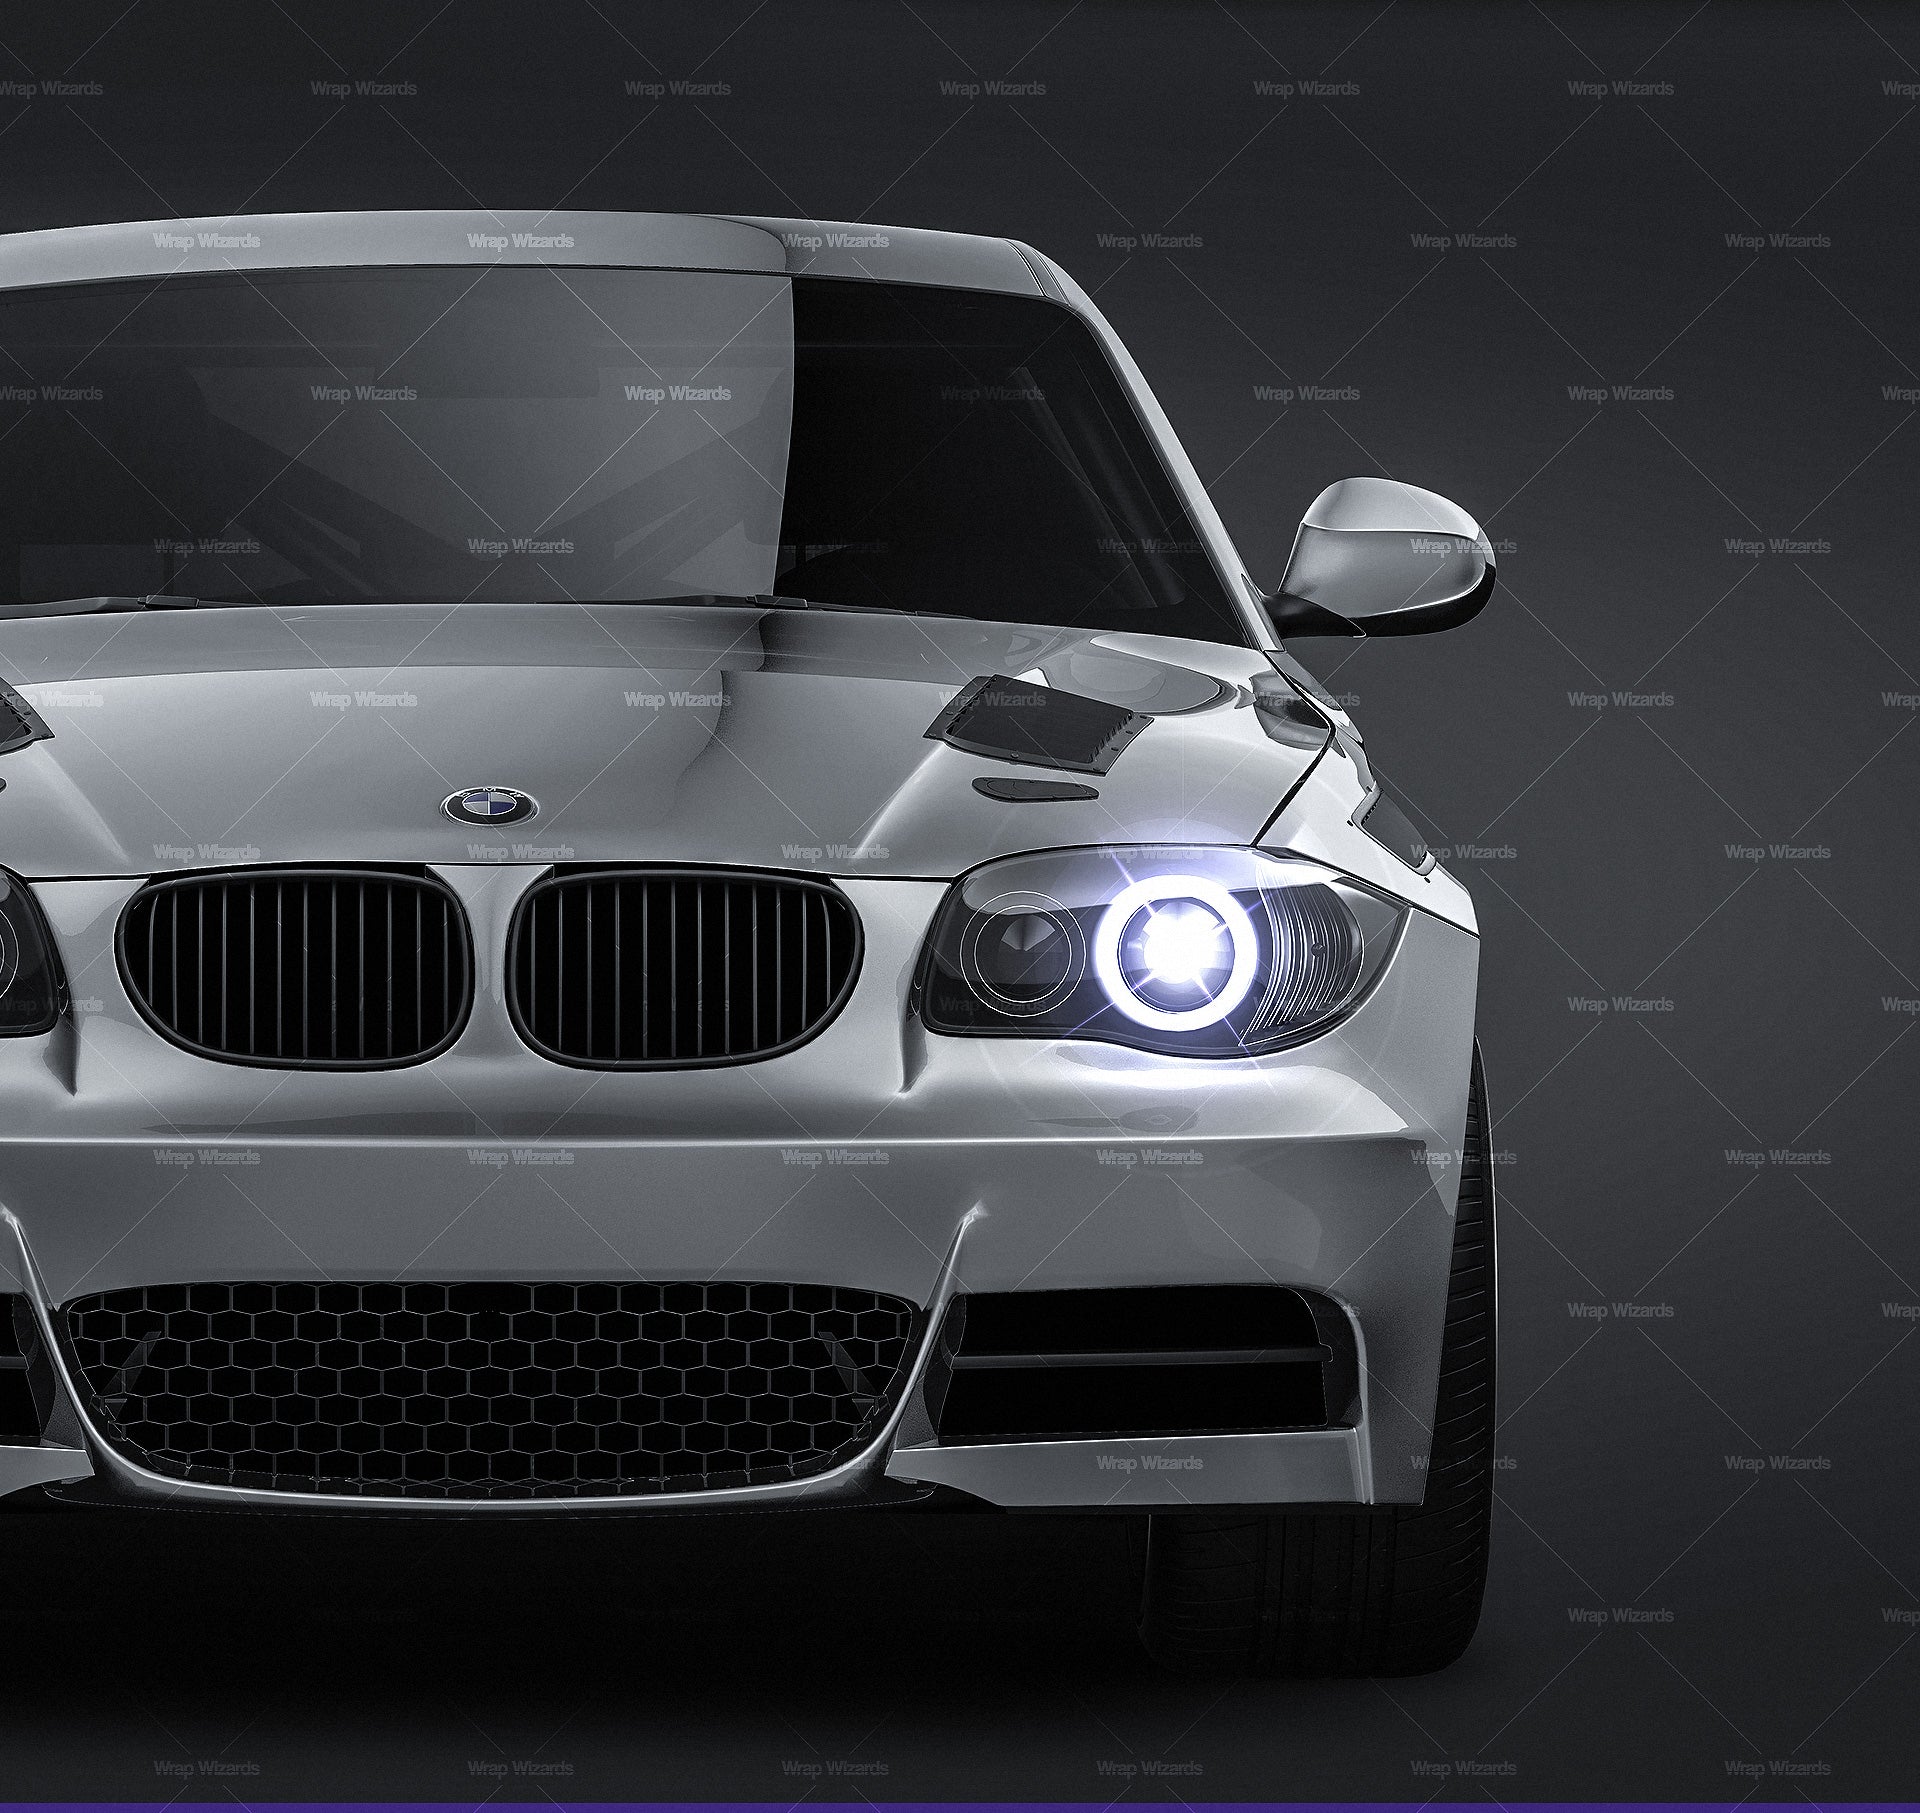 BMW 1 Series E82 Coupe 2009 glossy finish - all sides Car Mockup Template.psd